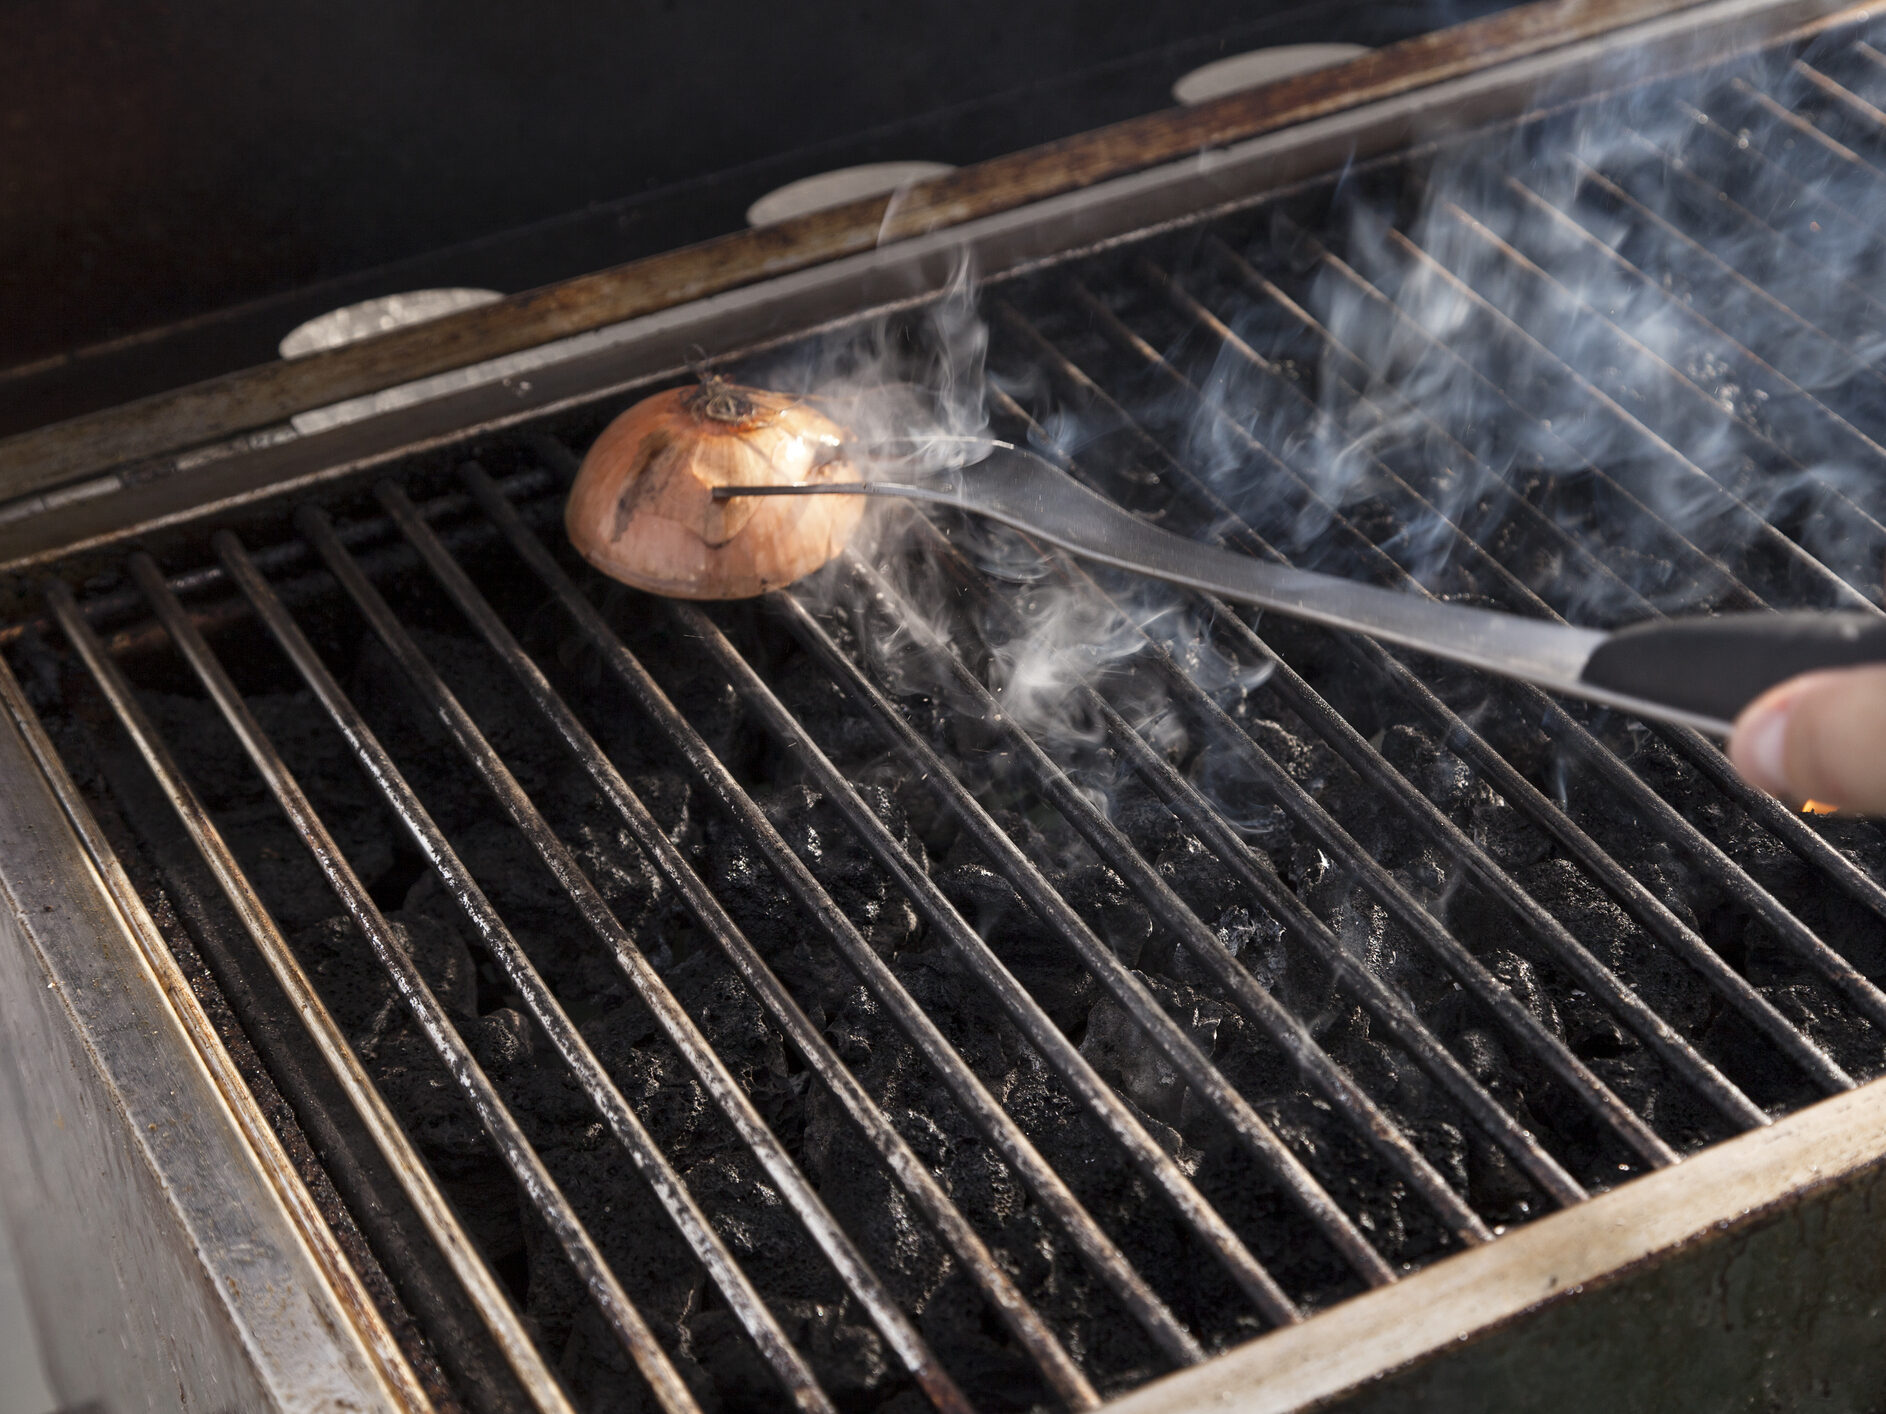 Using onion and grill fork to clean grates